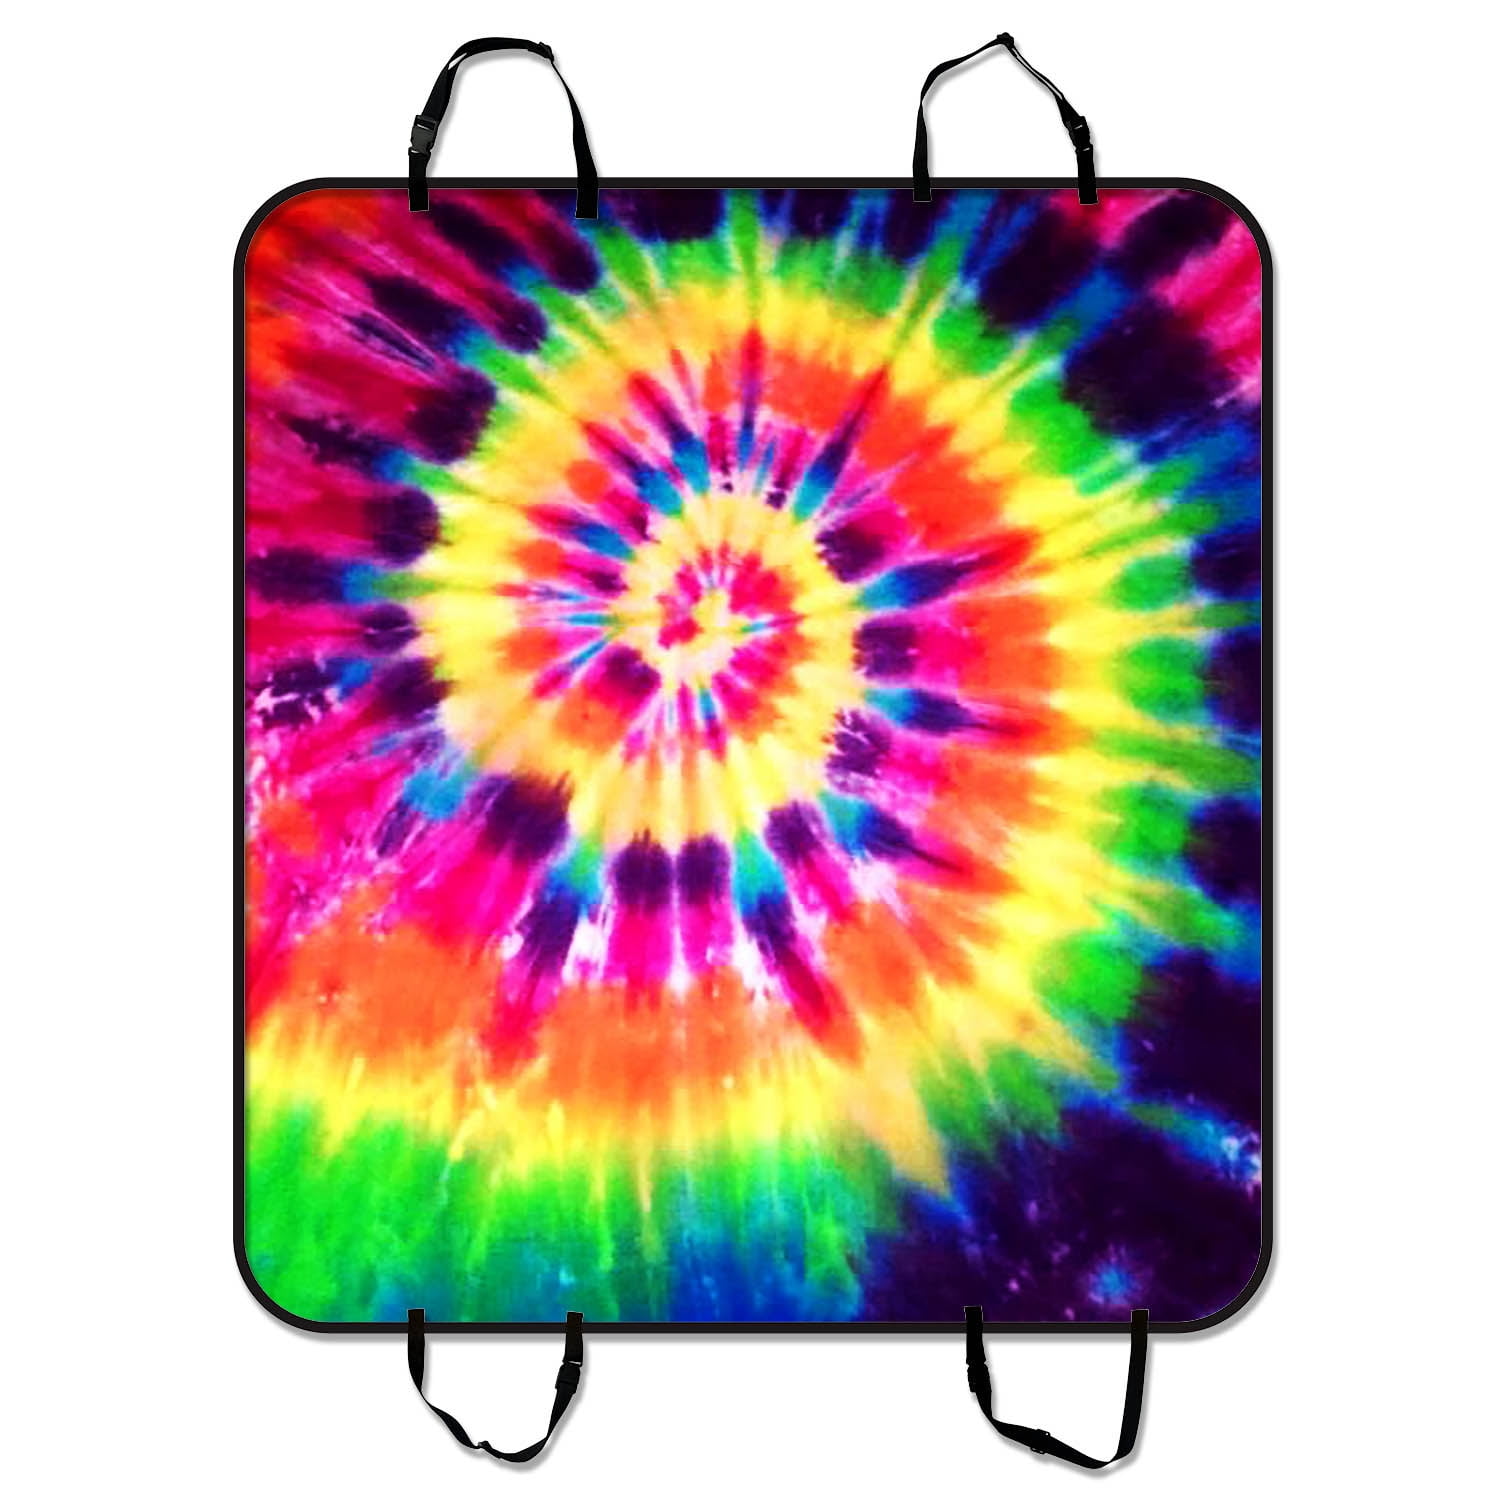 GePrint Abstract Swirl Tie Dye Print Universal Car Seat Sandle Cover for Front Only,Bright Bucket Seats Protector,Anti-Slip and Durable Set of 2